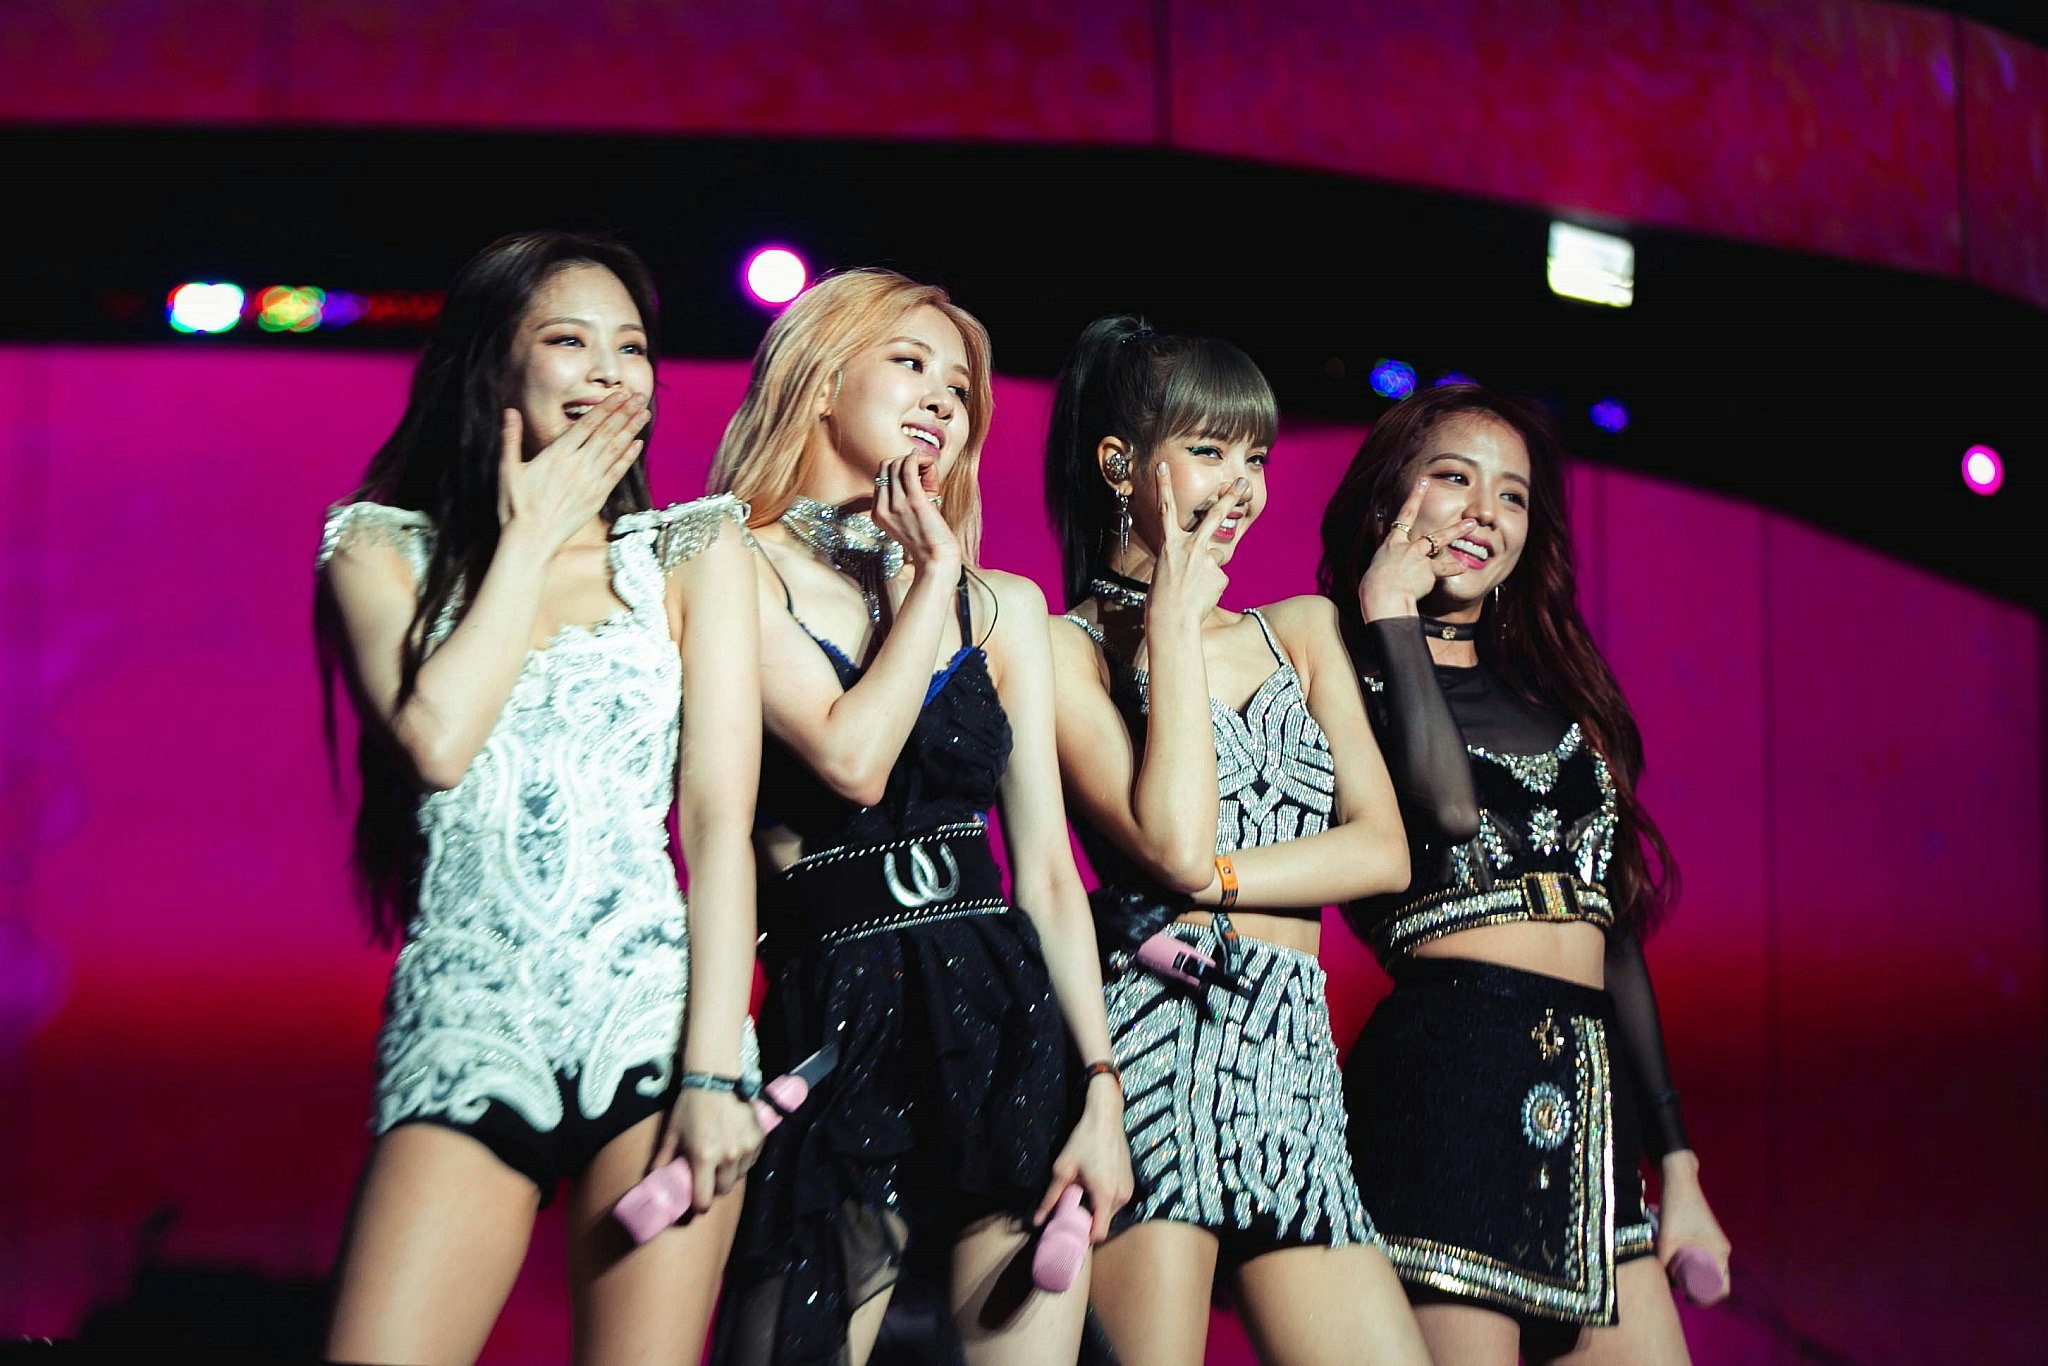 The four members of K-Pop girl group Blackpink pose on a pink-lit stage.